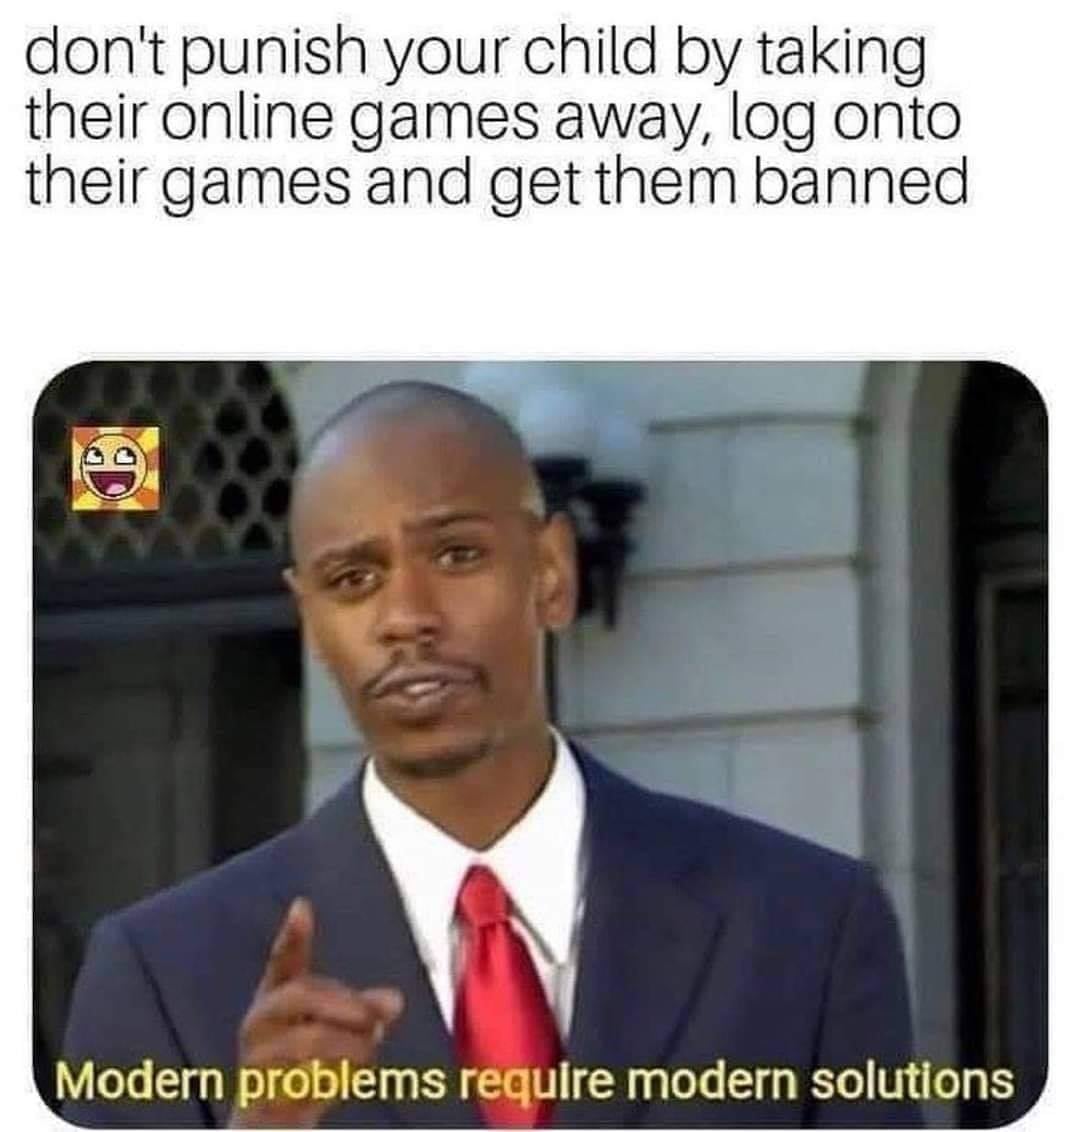 don't punish your child by taking their online games away, log onto their game and get them banned, modern problems require modern solutions